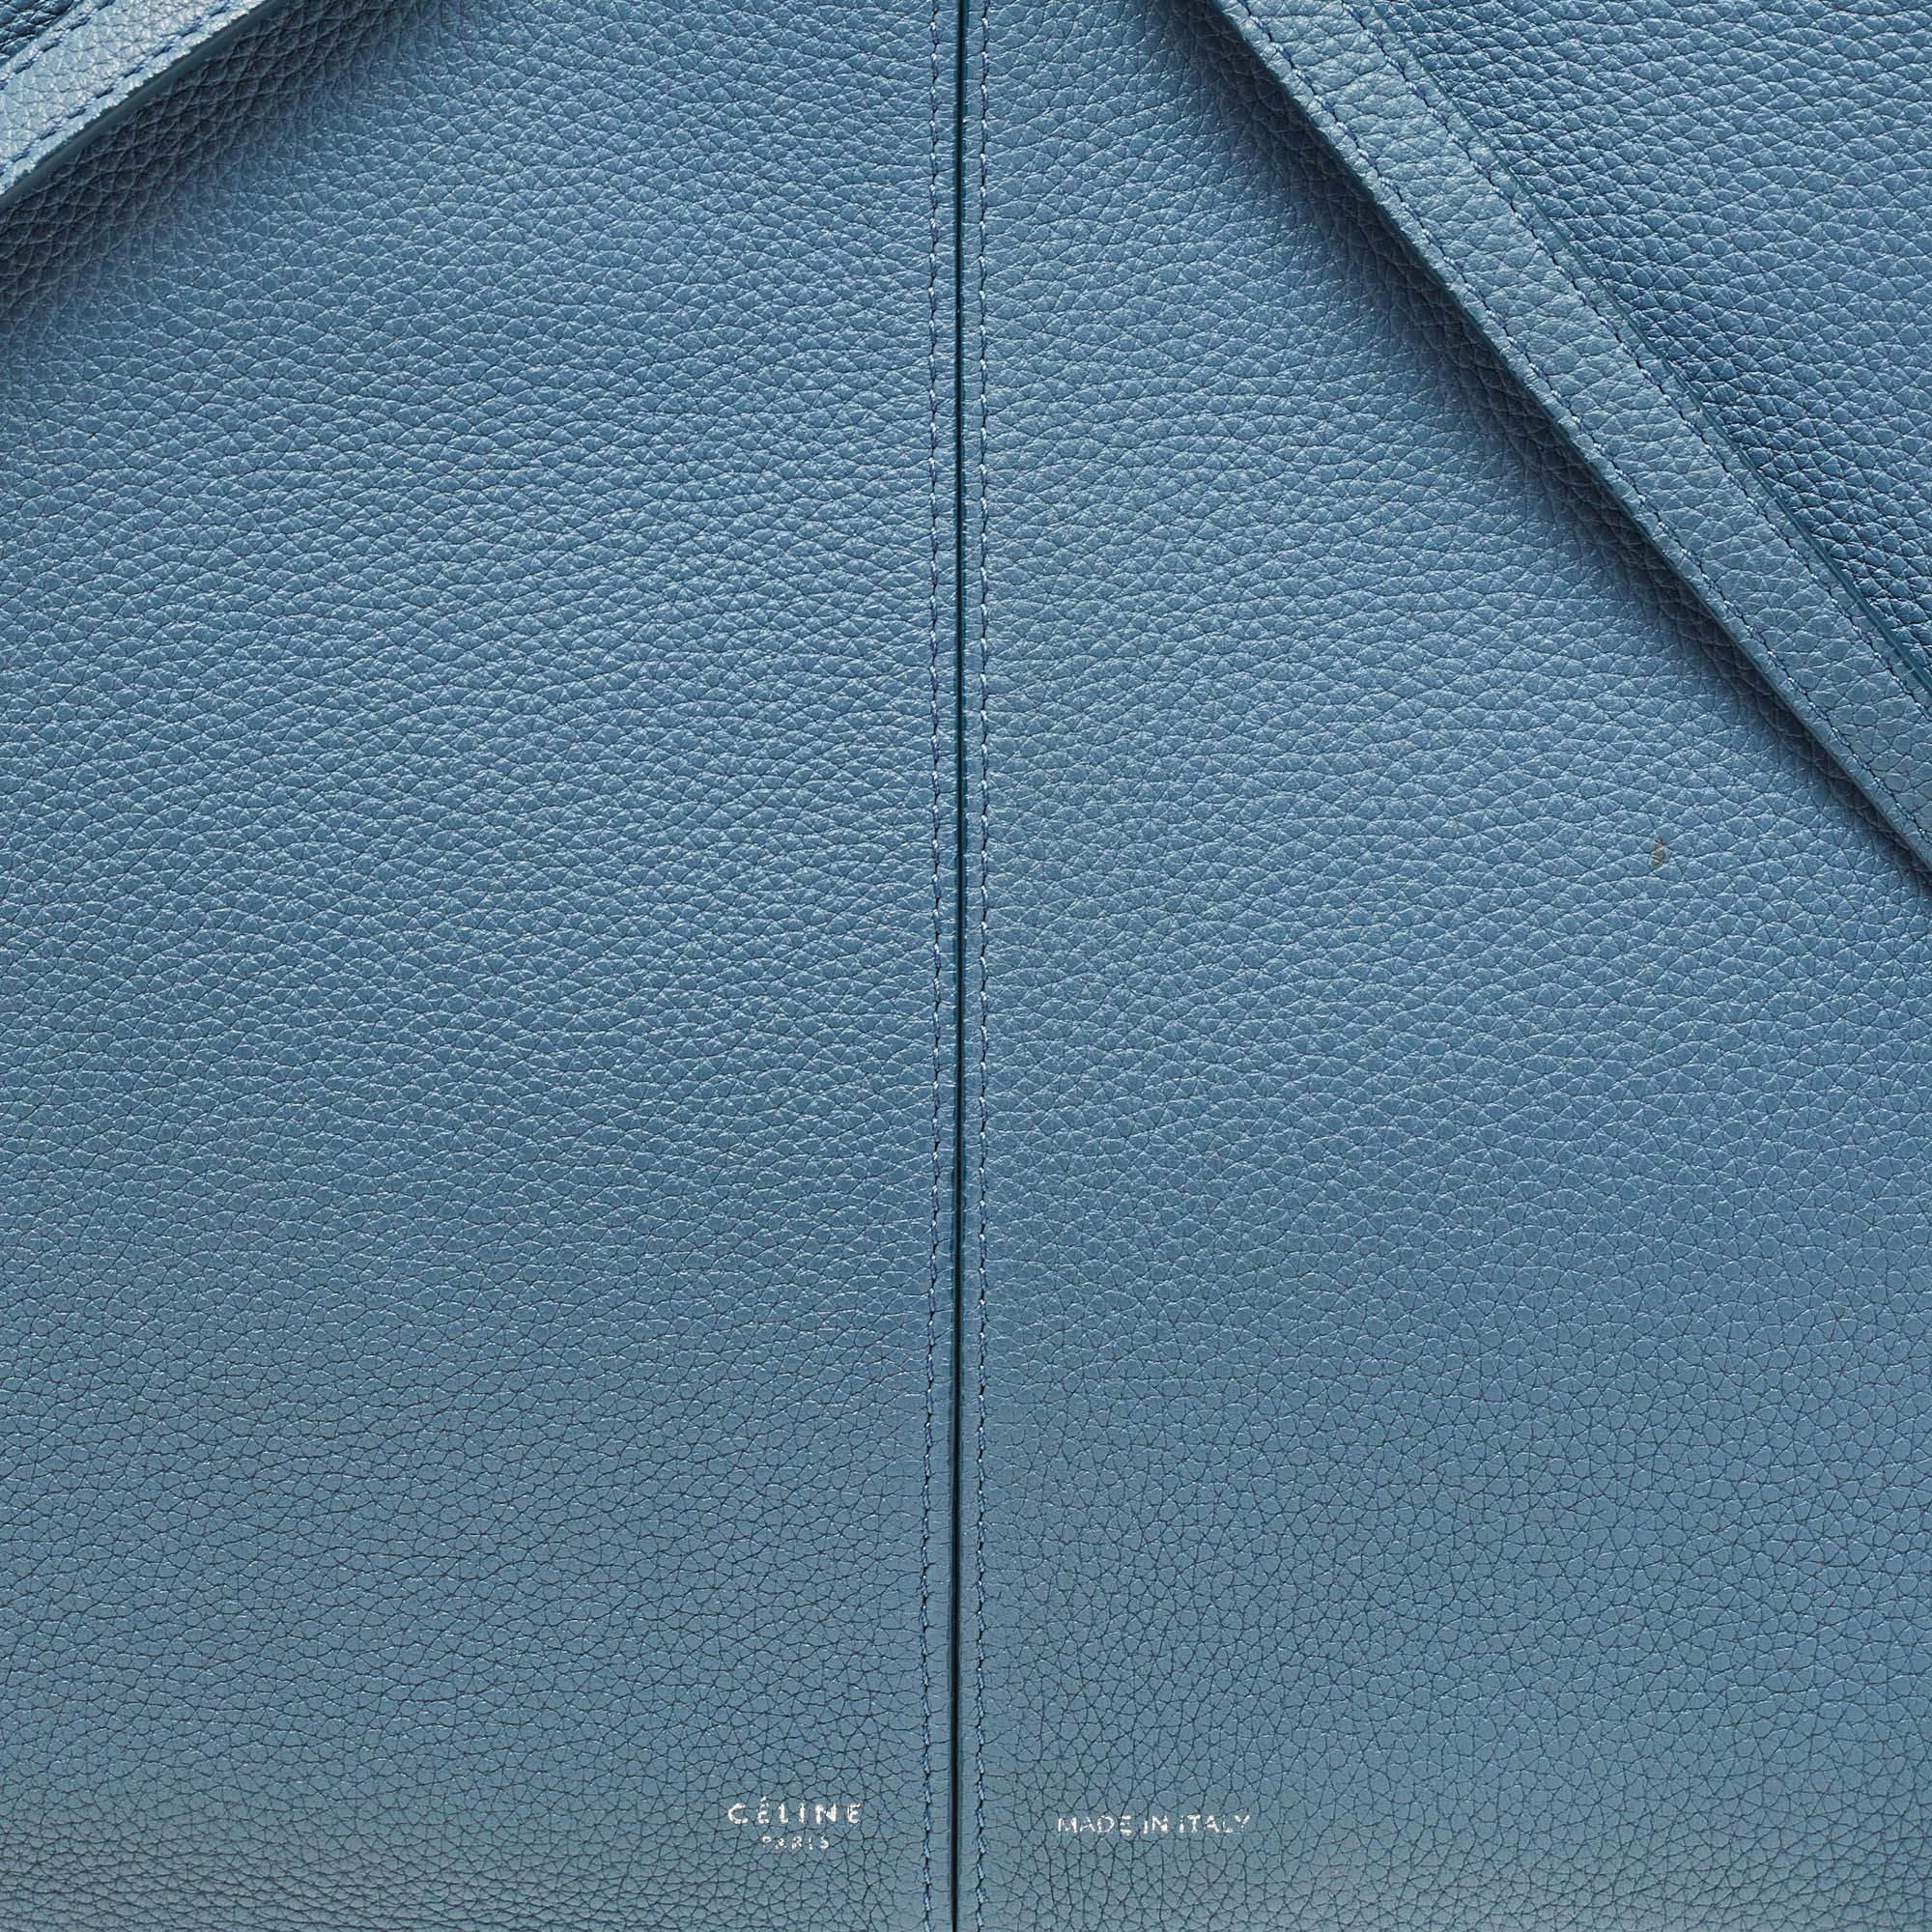 Celine Blue Leather Small Tri-Fold Tote For Sale 7